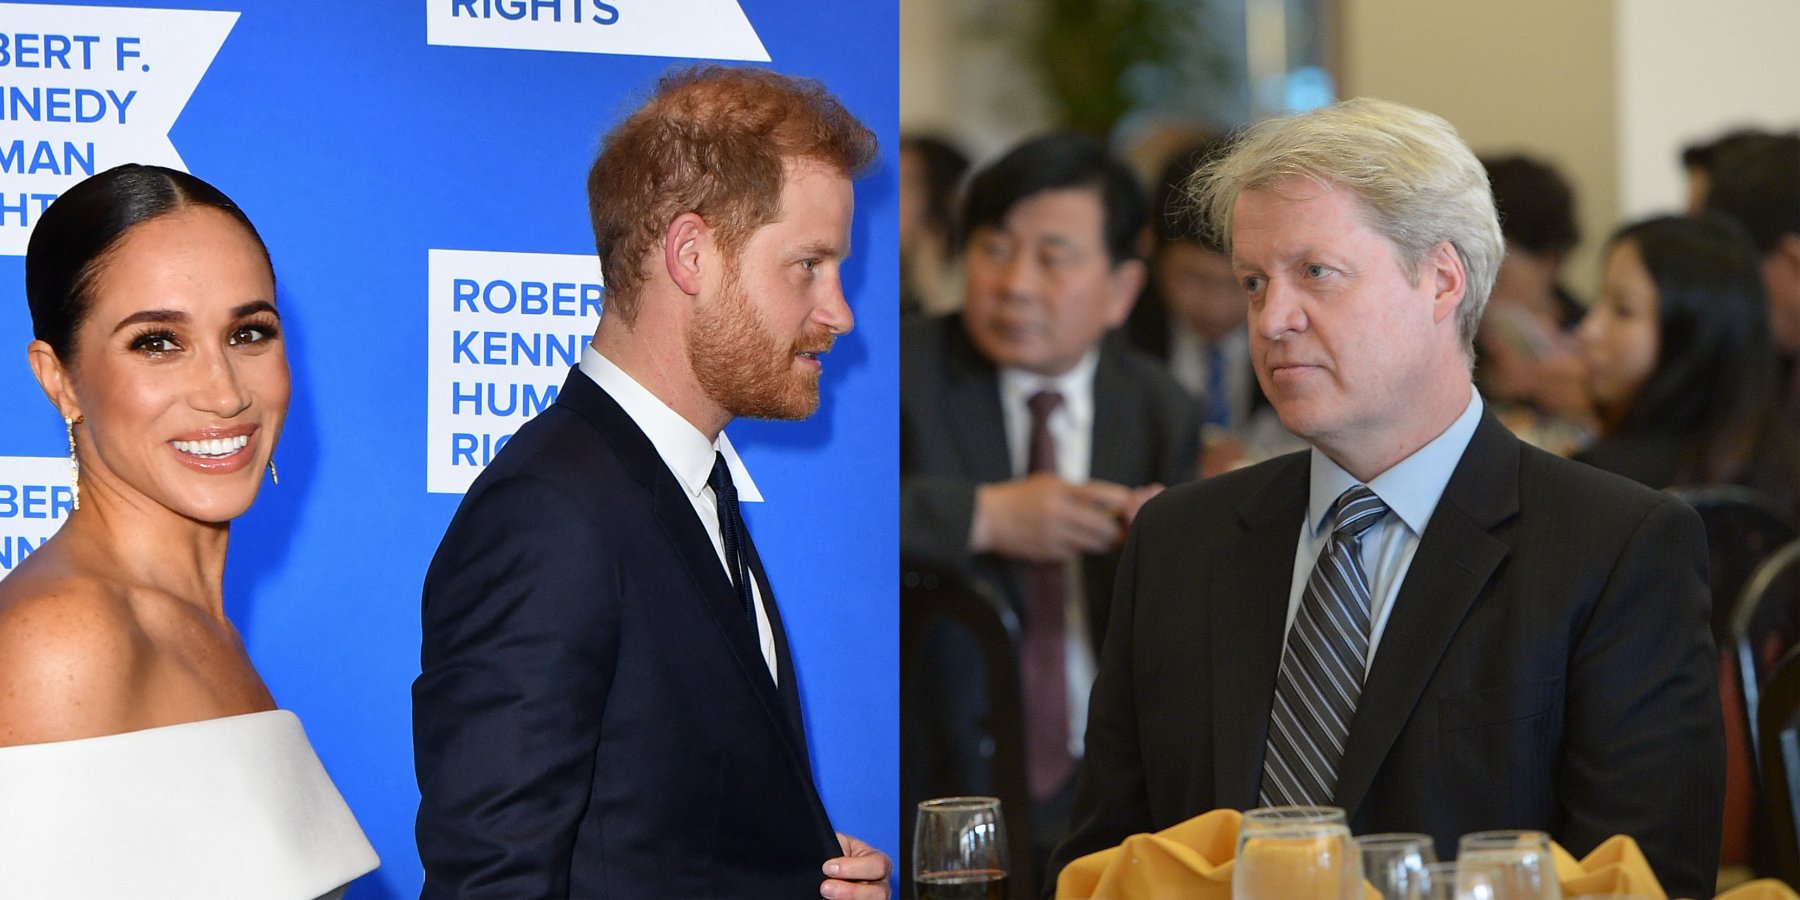 Meghan Markle, Prince Harry and Charles Spencer are pictured in side by side photographs.